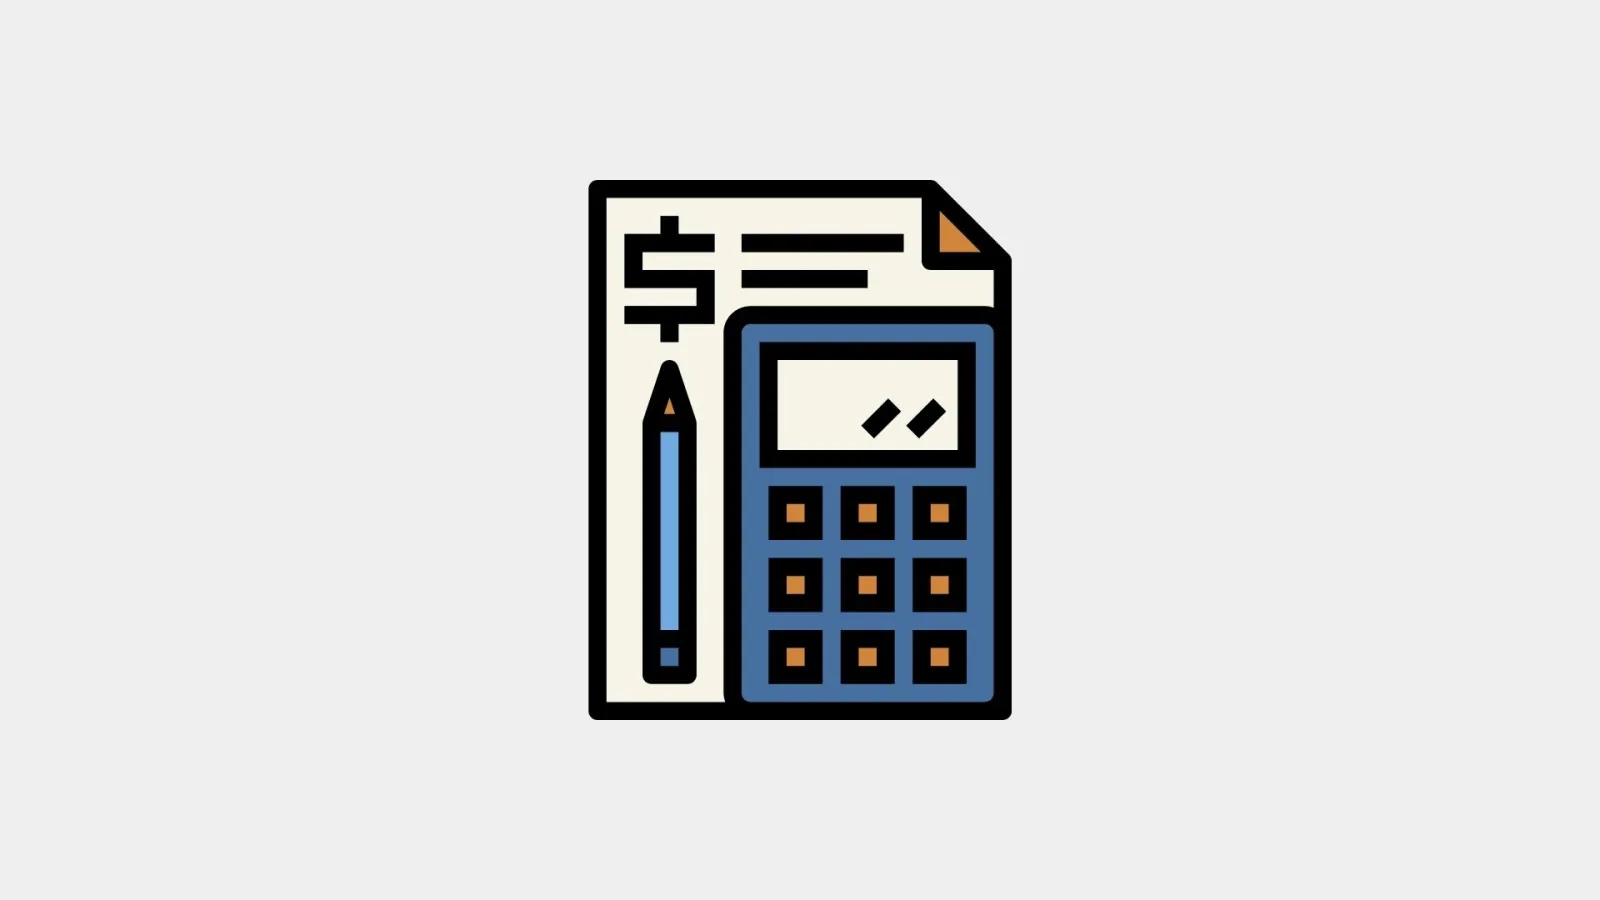 Graphic of calculator and pen